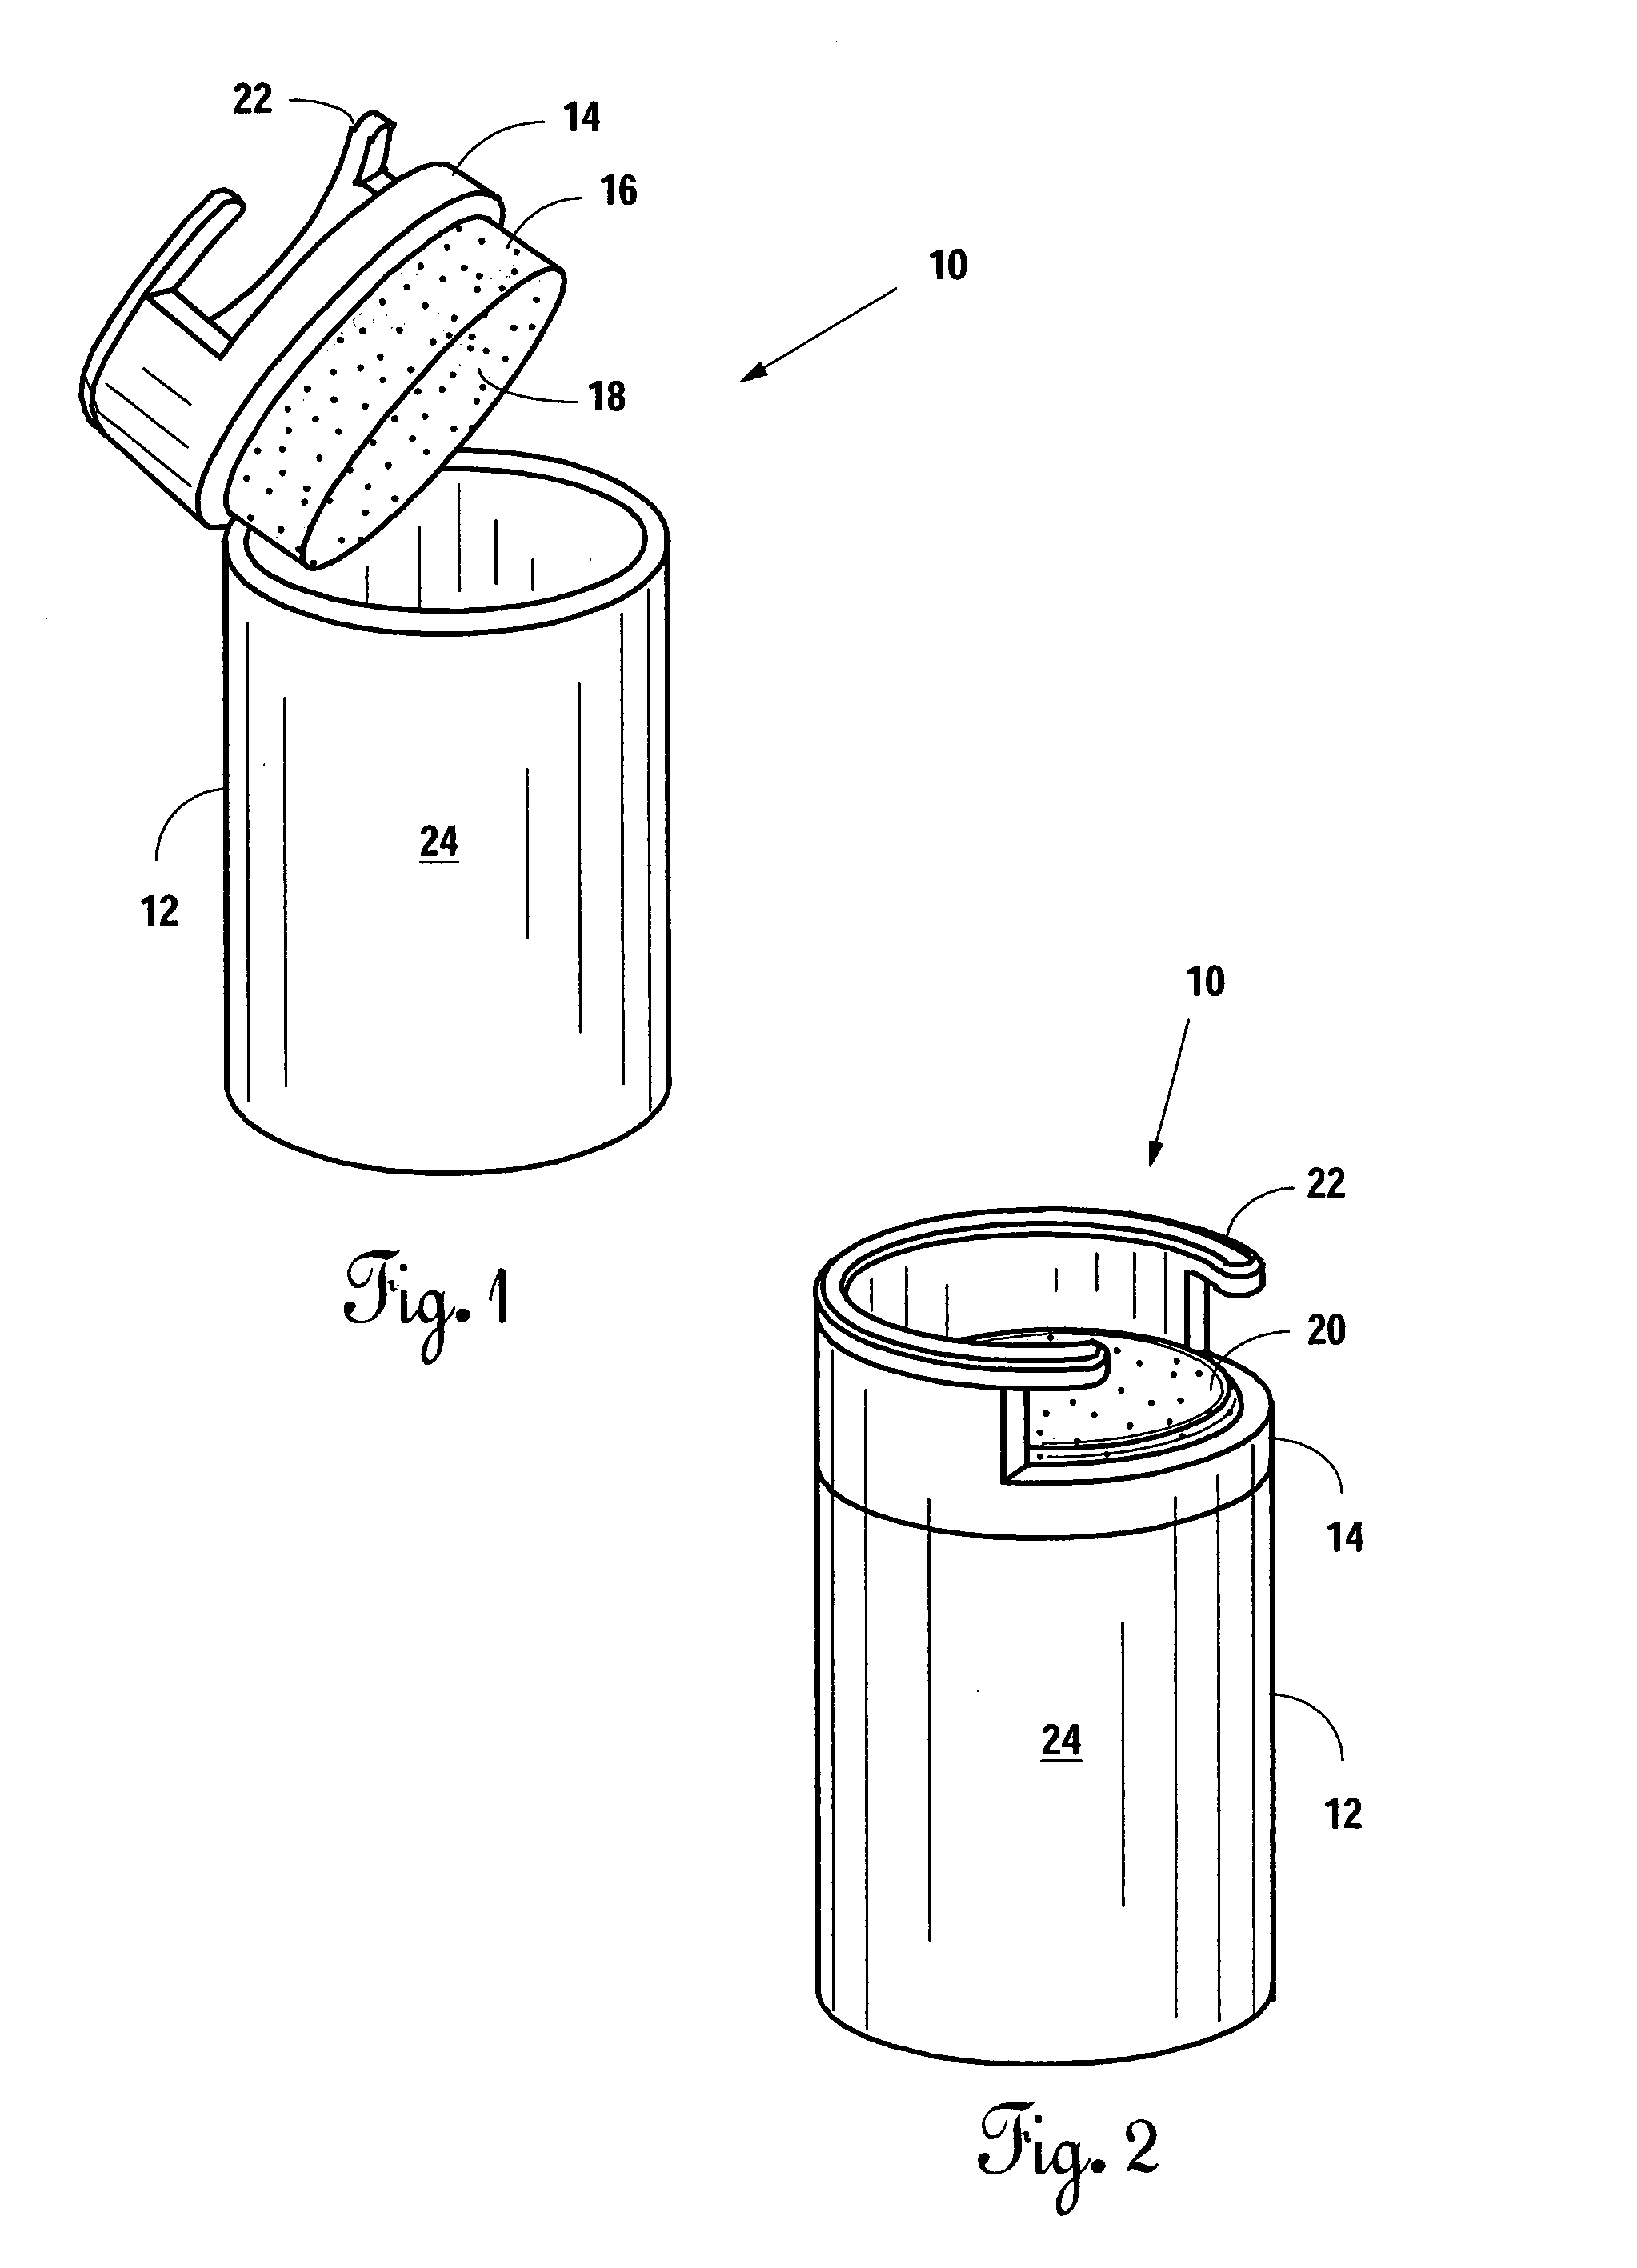 Stethoscope cleansing unit and business method for providing advertising through the use of stethoscope cleansing unit